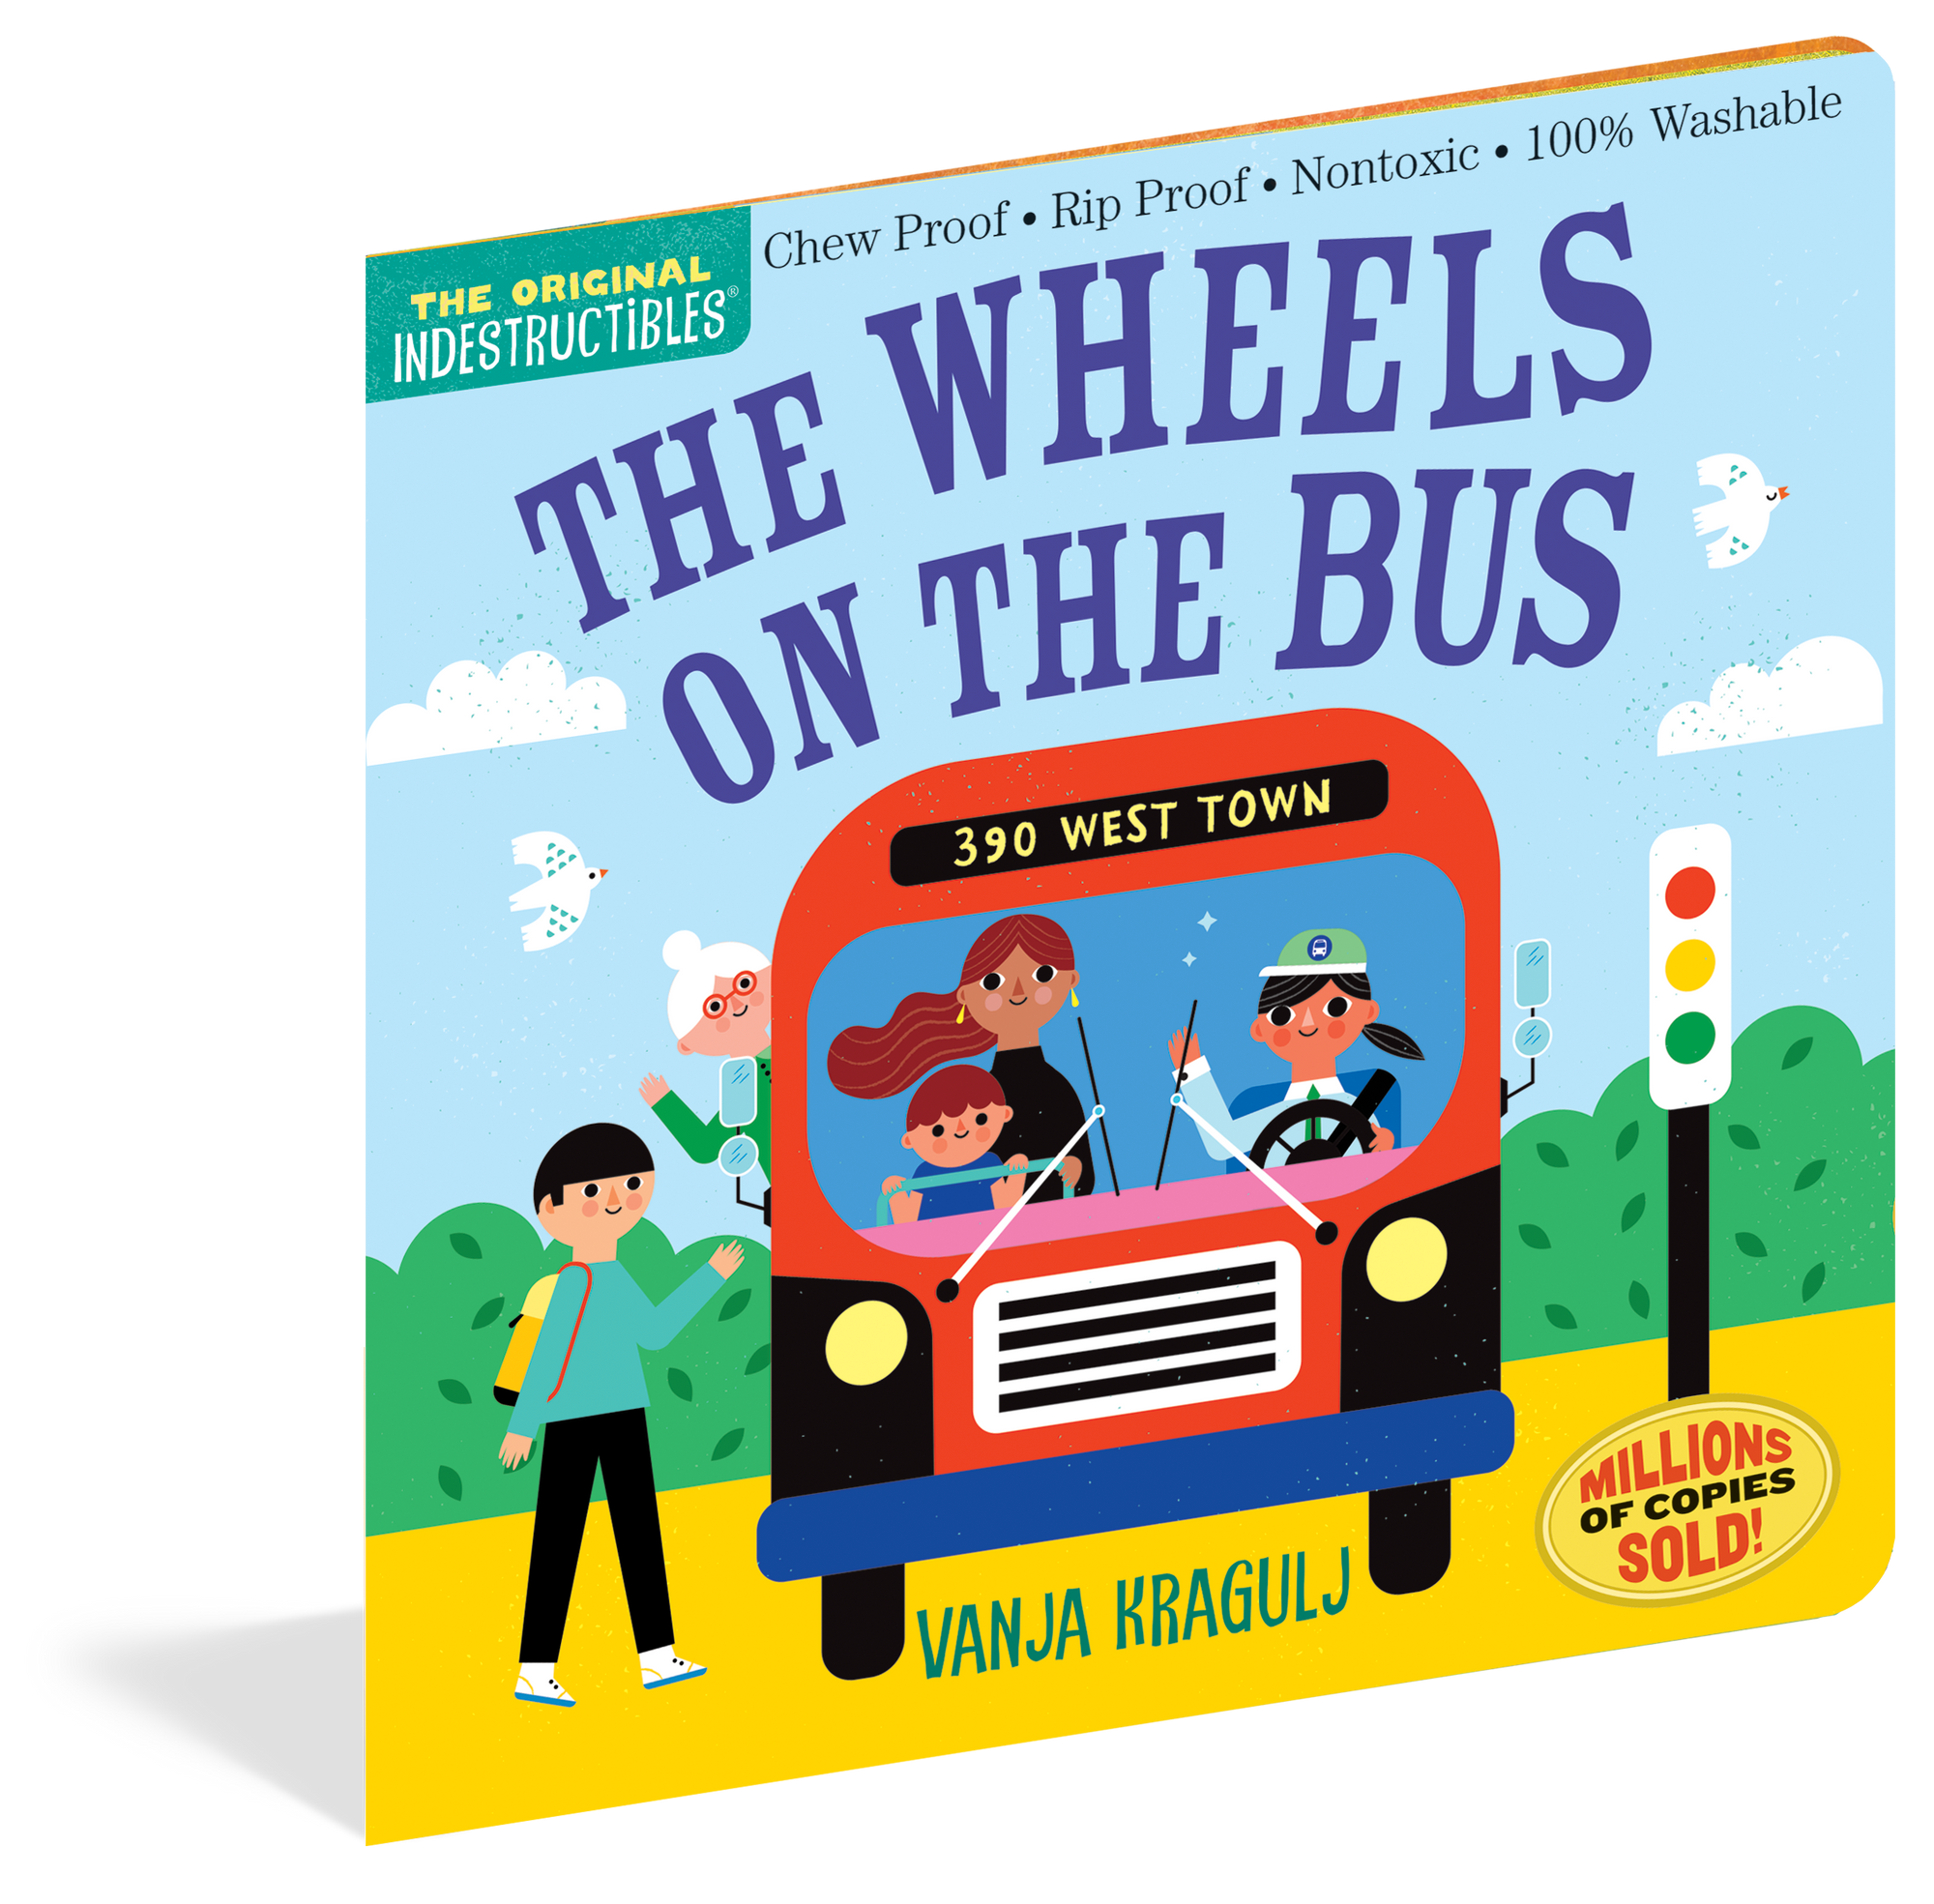 Indestructibles: The Wheels on the Bus